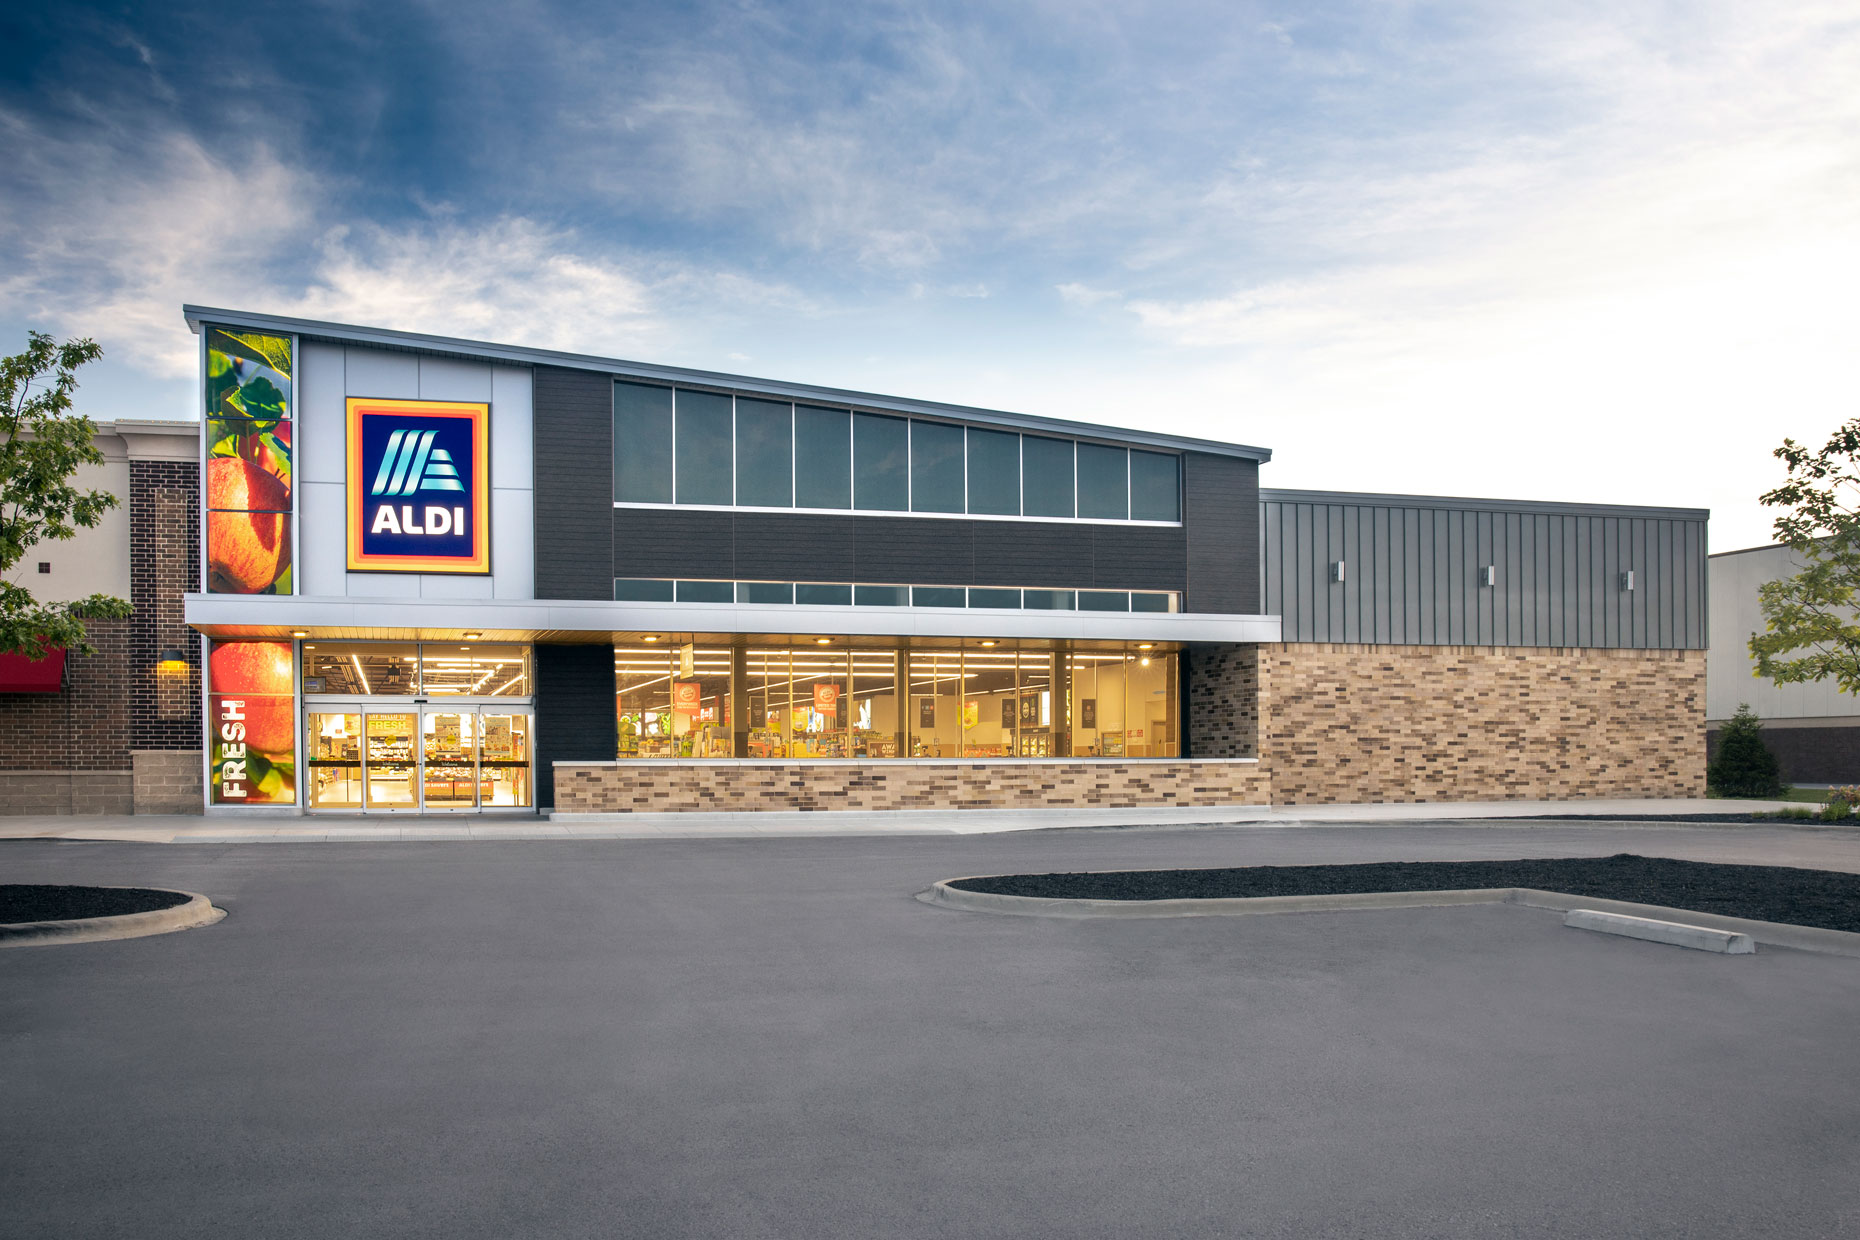 Investment services - Aldi's new store in the city: a modern retail space offering a wide range of products.